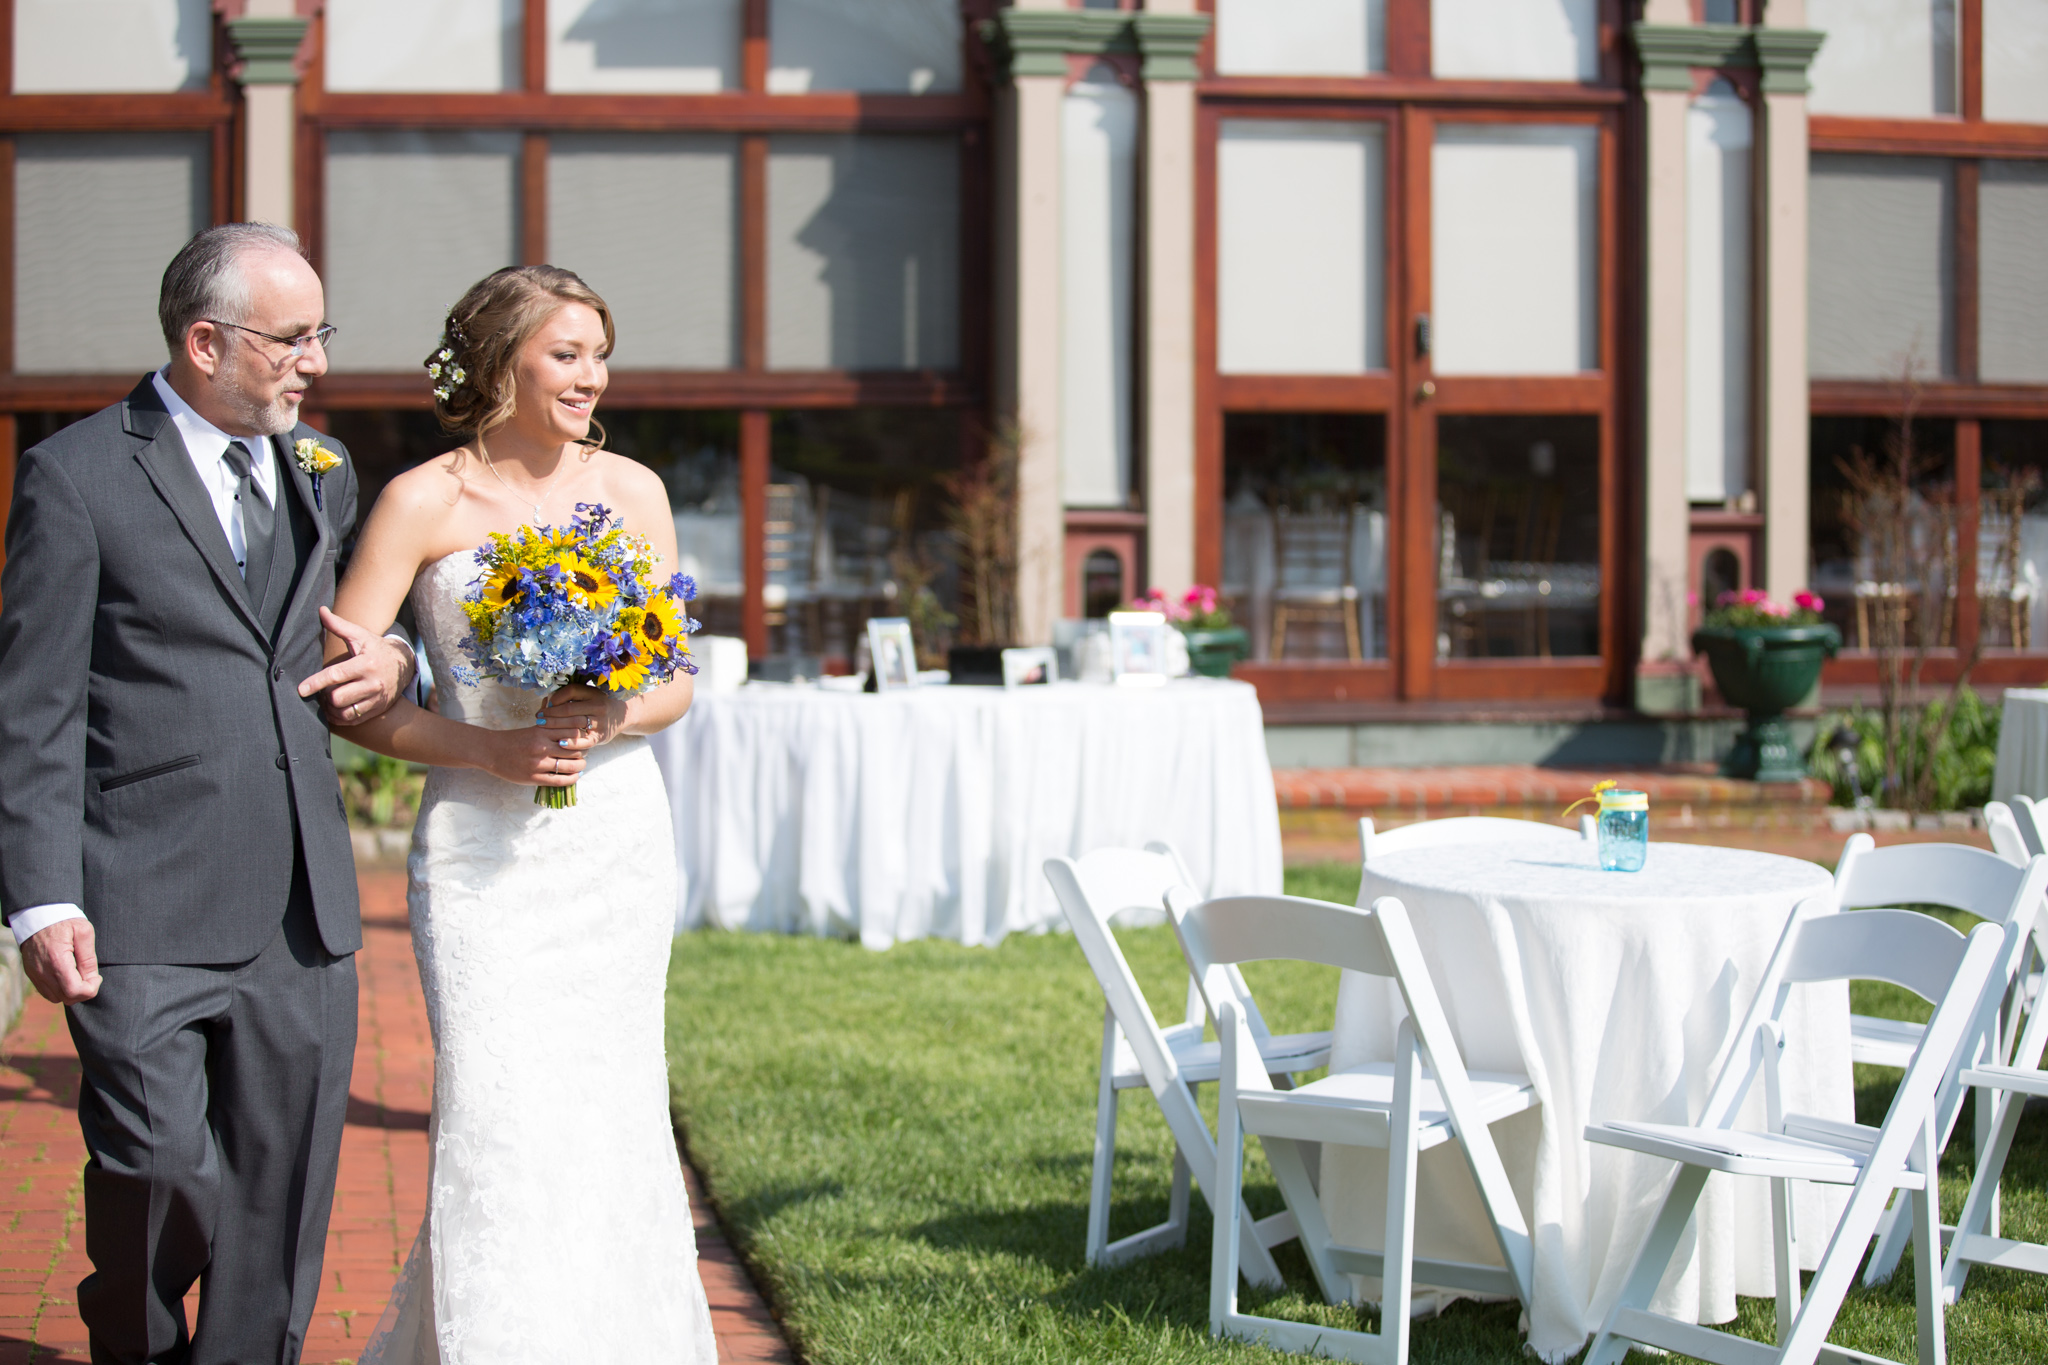 Mike+Alyssa - Cape May Southern Mansion Wedding Ceremony photo